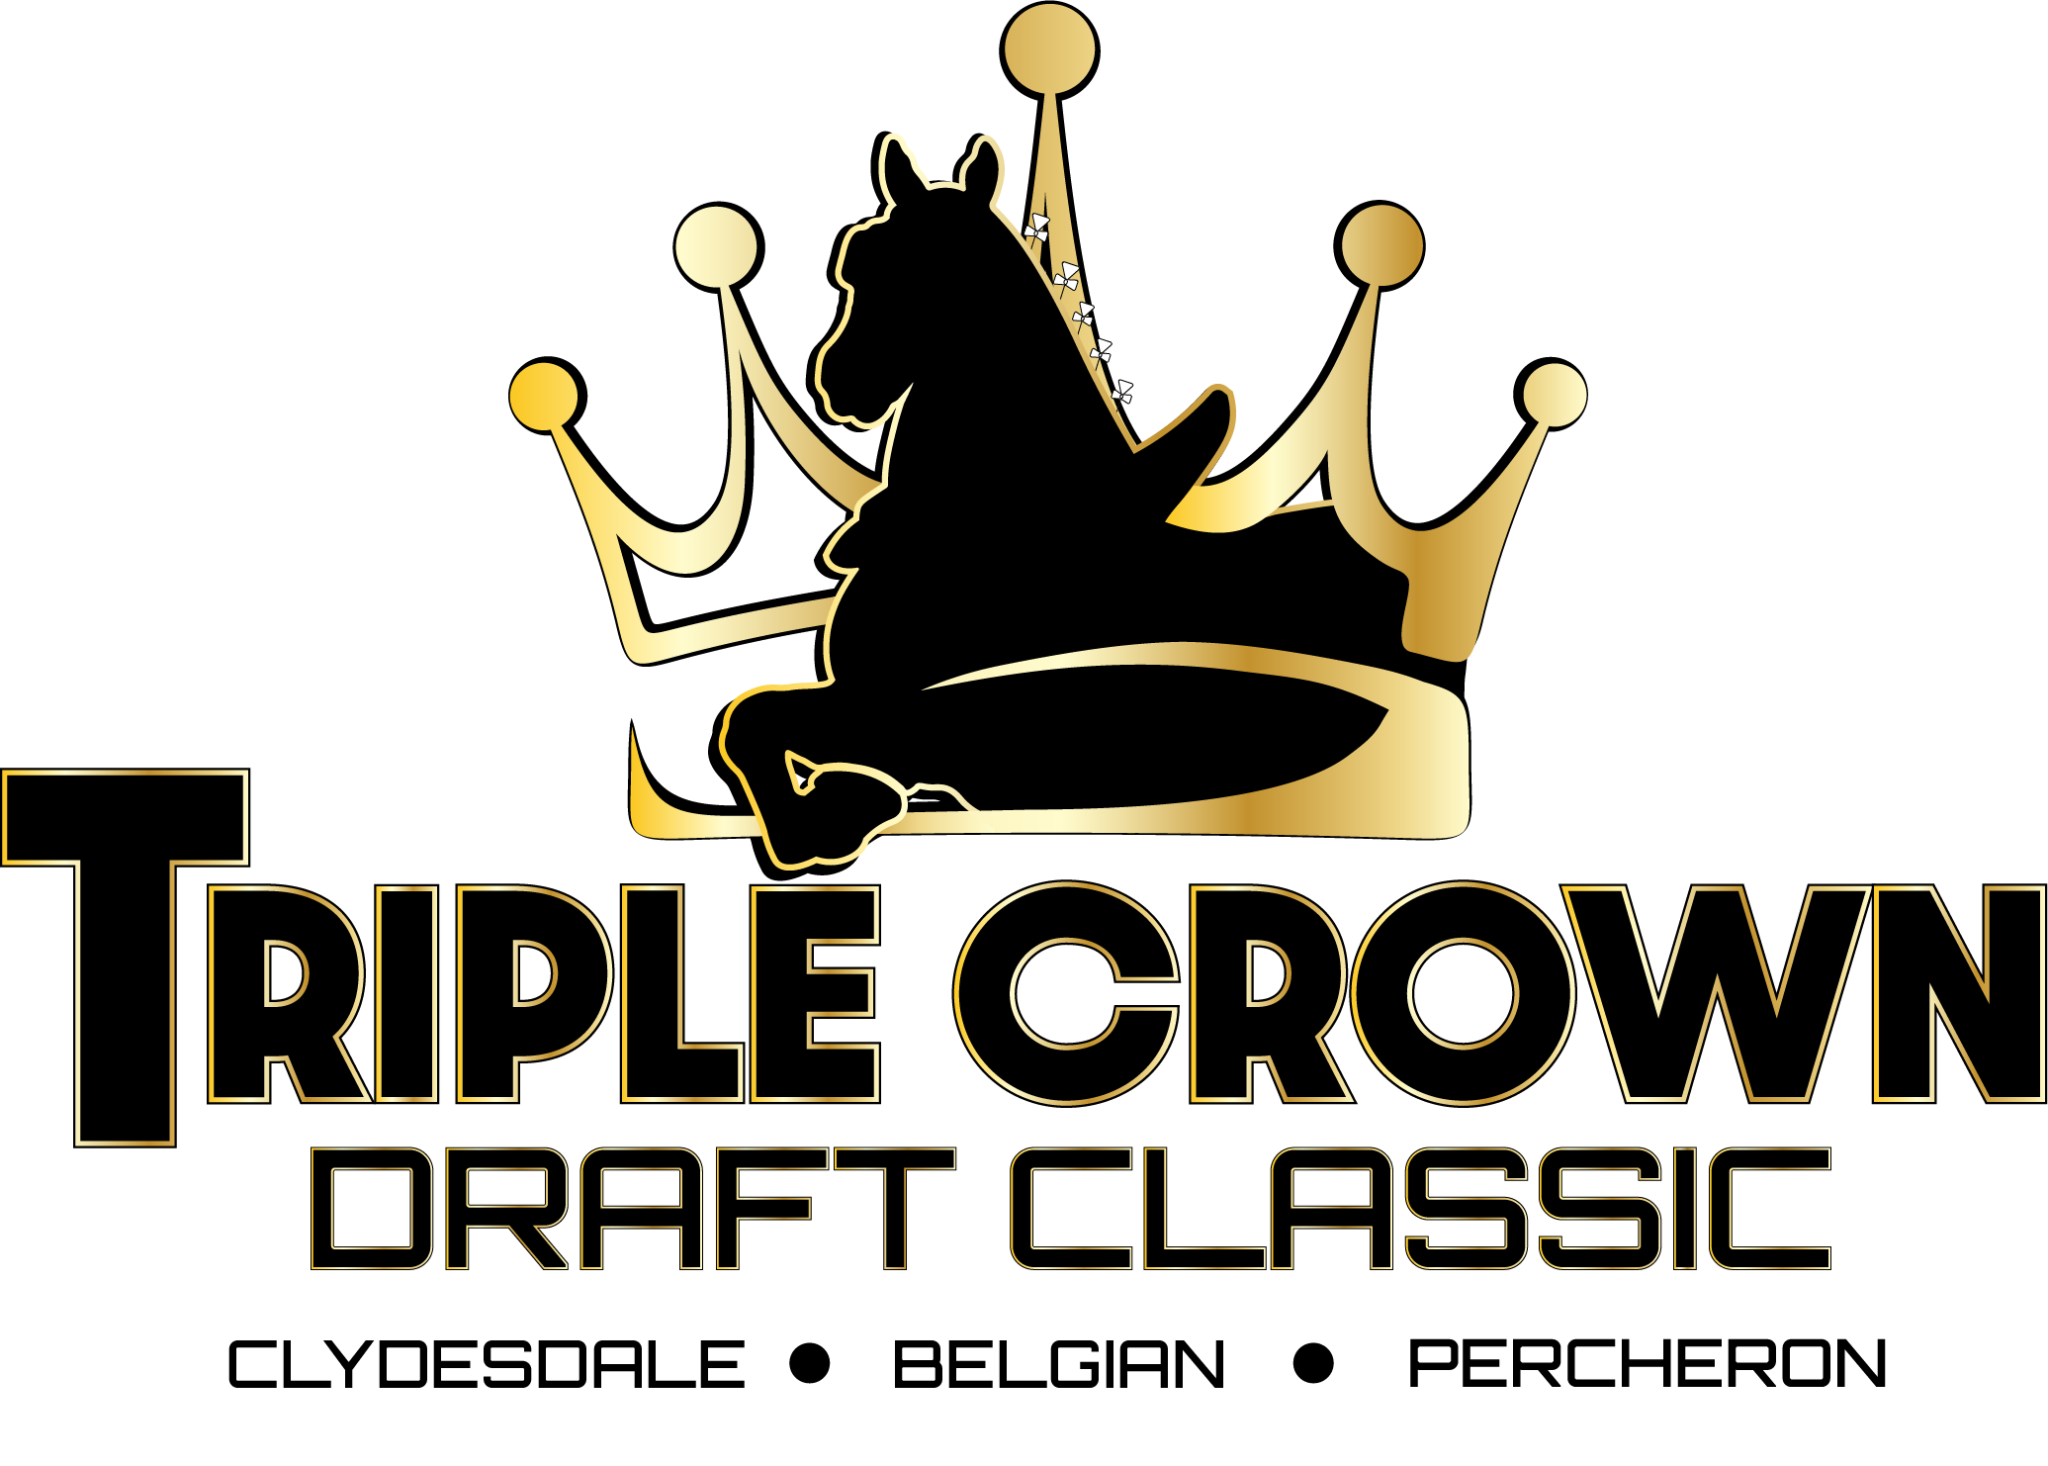 New website launch! – Triple Crown Draft Classic